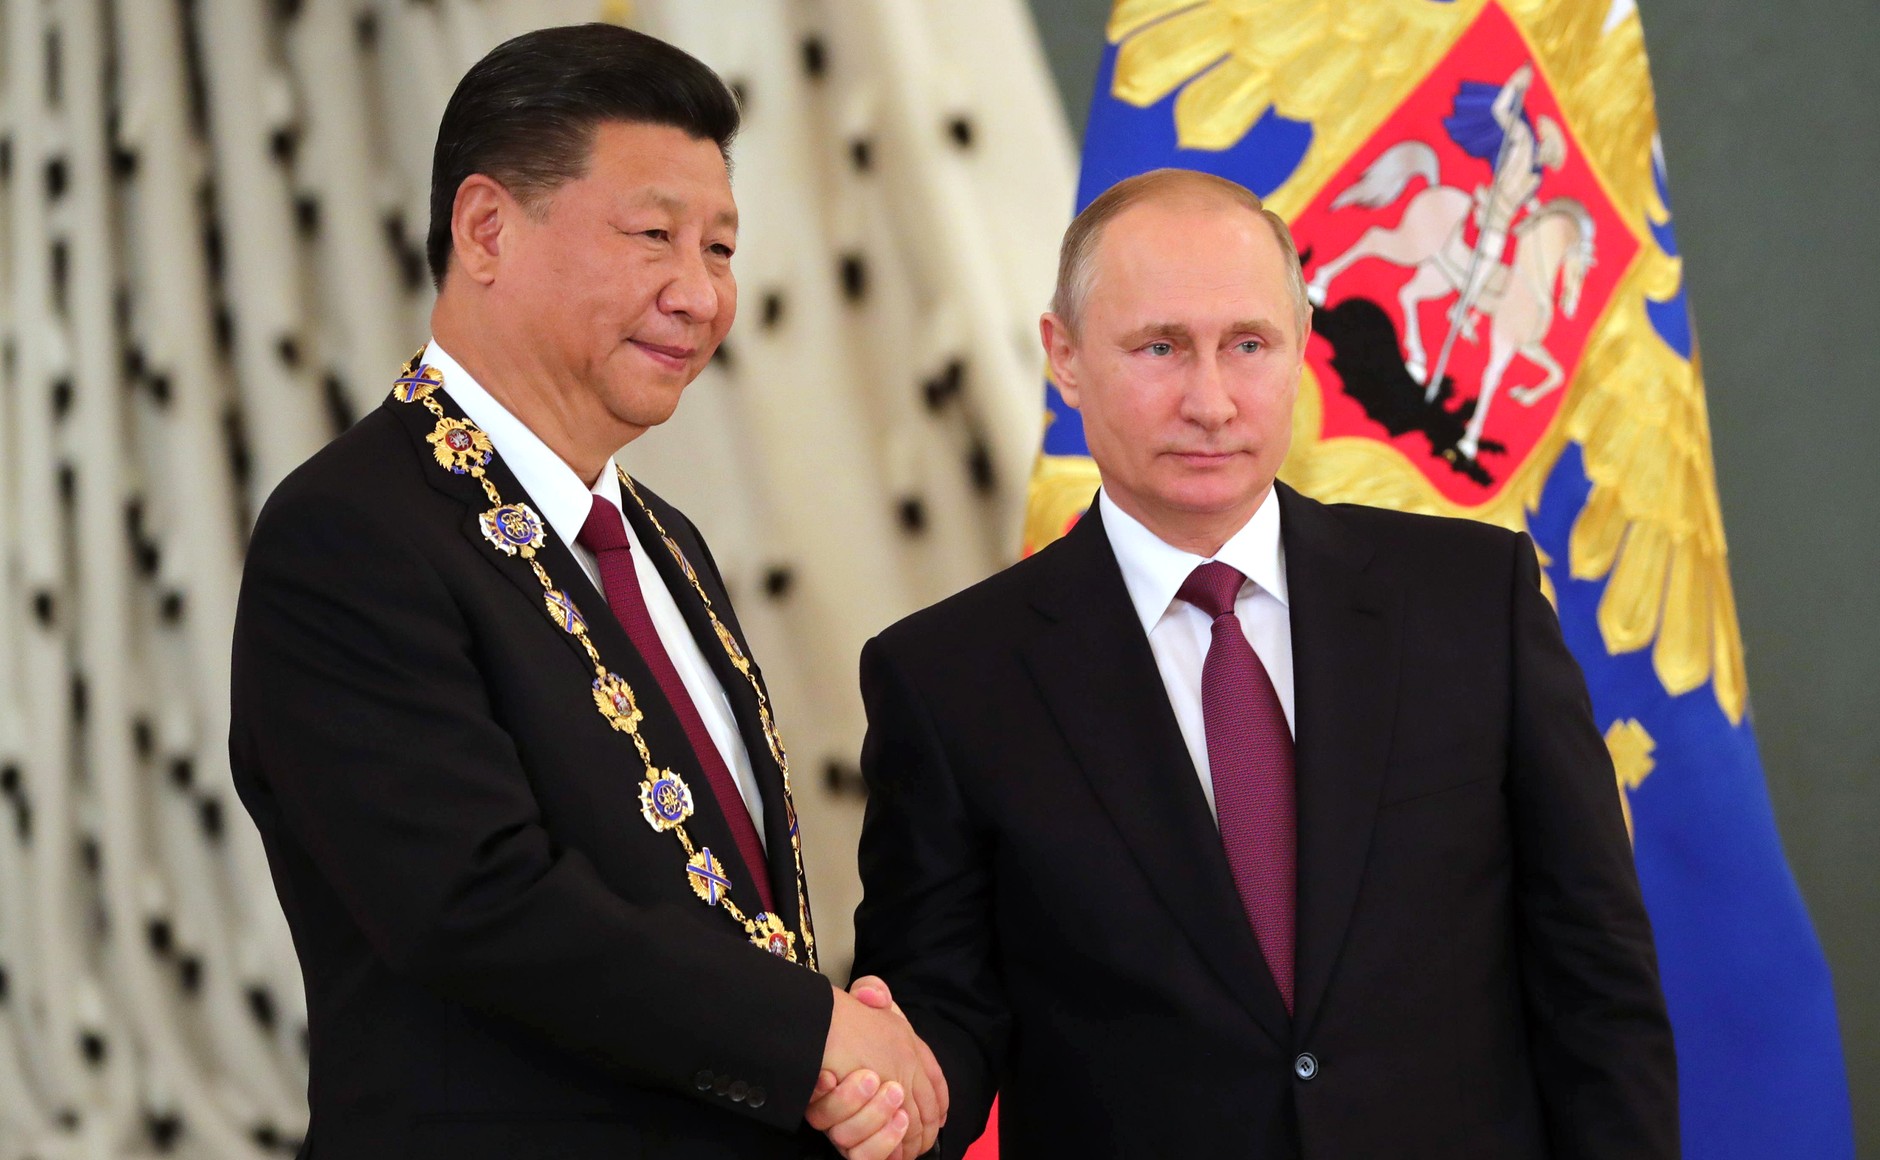 Vladimir Putin and Xi Jinping exchanged new year greetings with each others